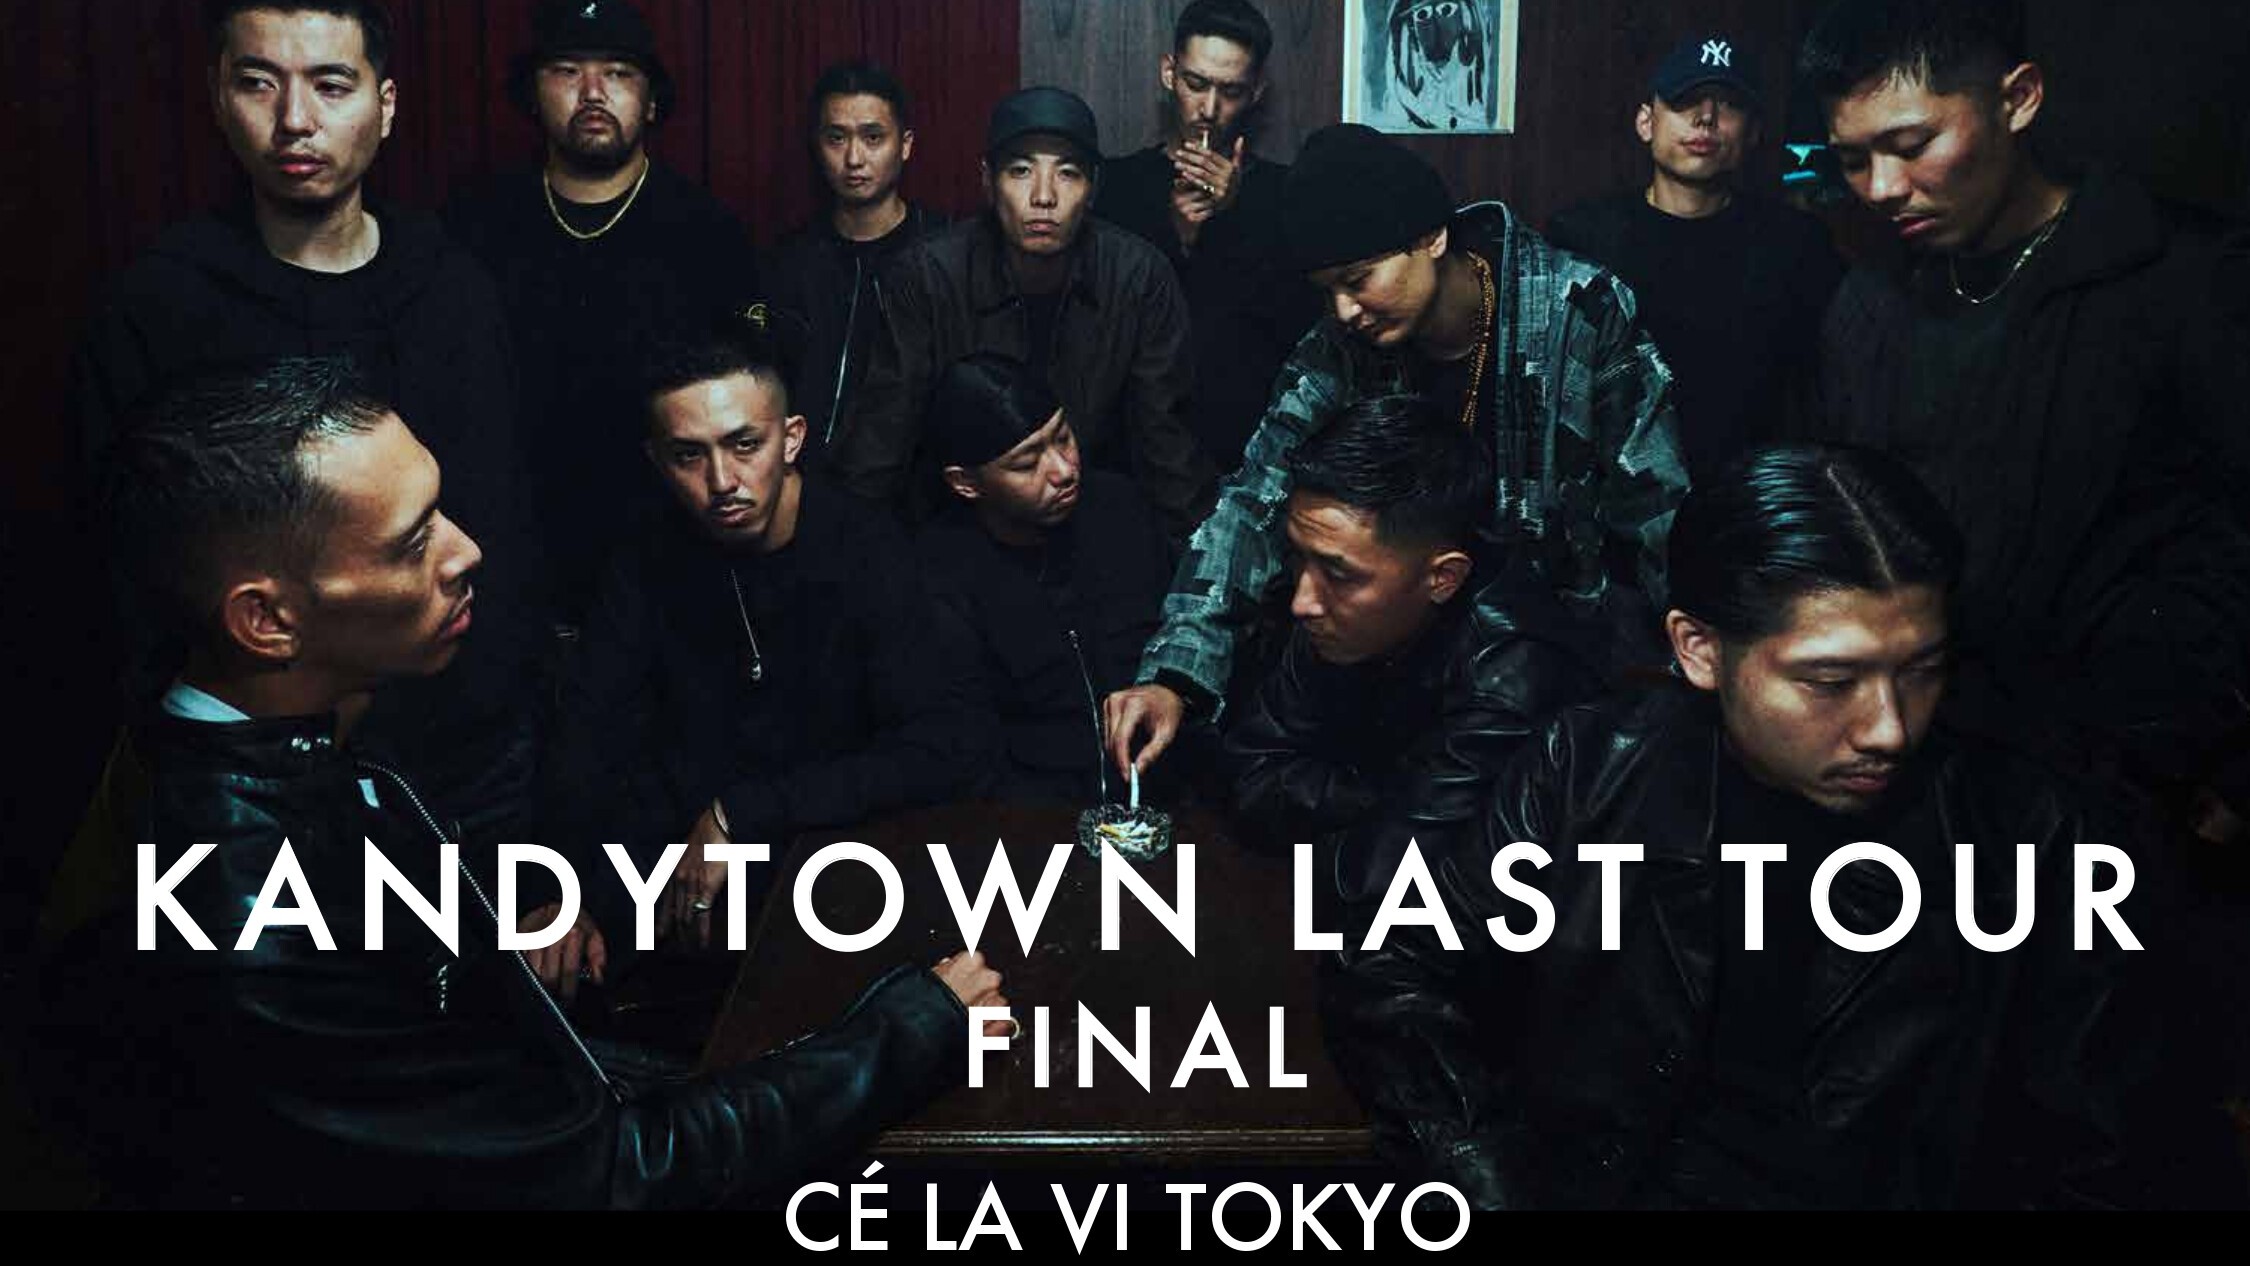 iFLYER: KANDYTOWN, Tokyo's leading HIPHOP crew scheduled to